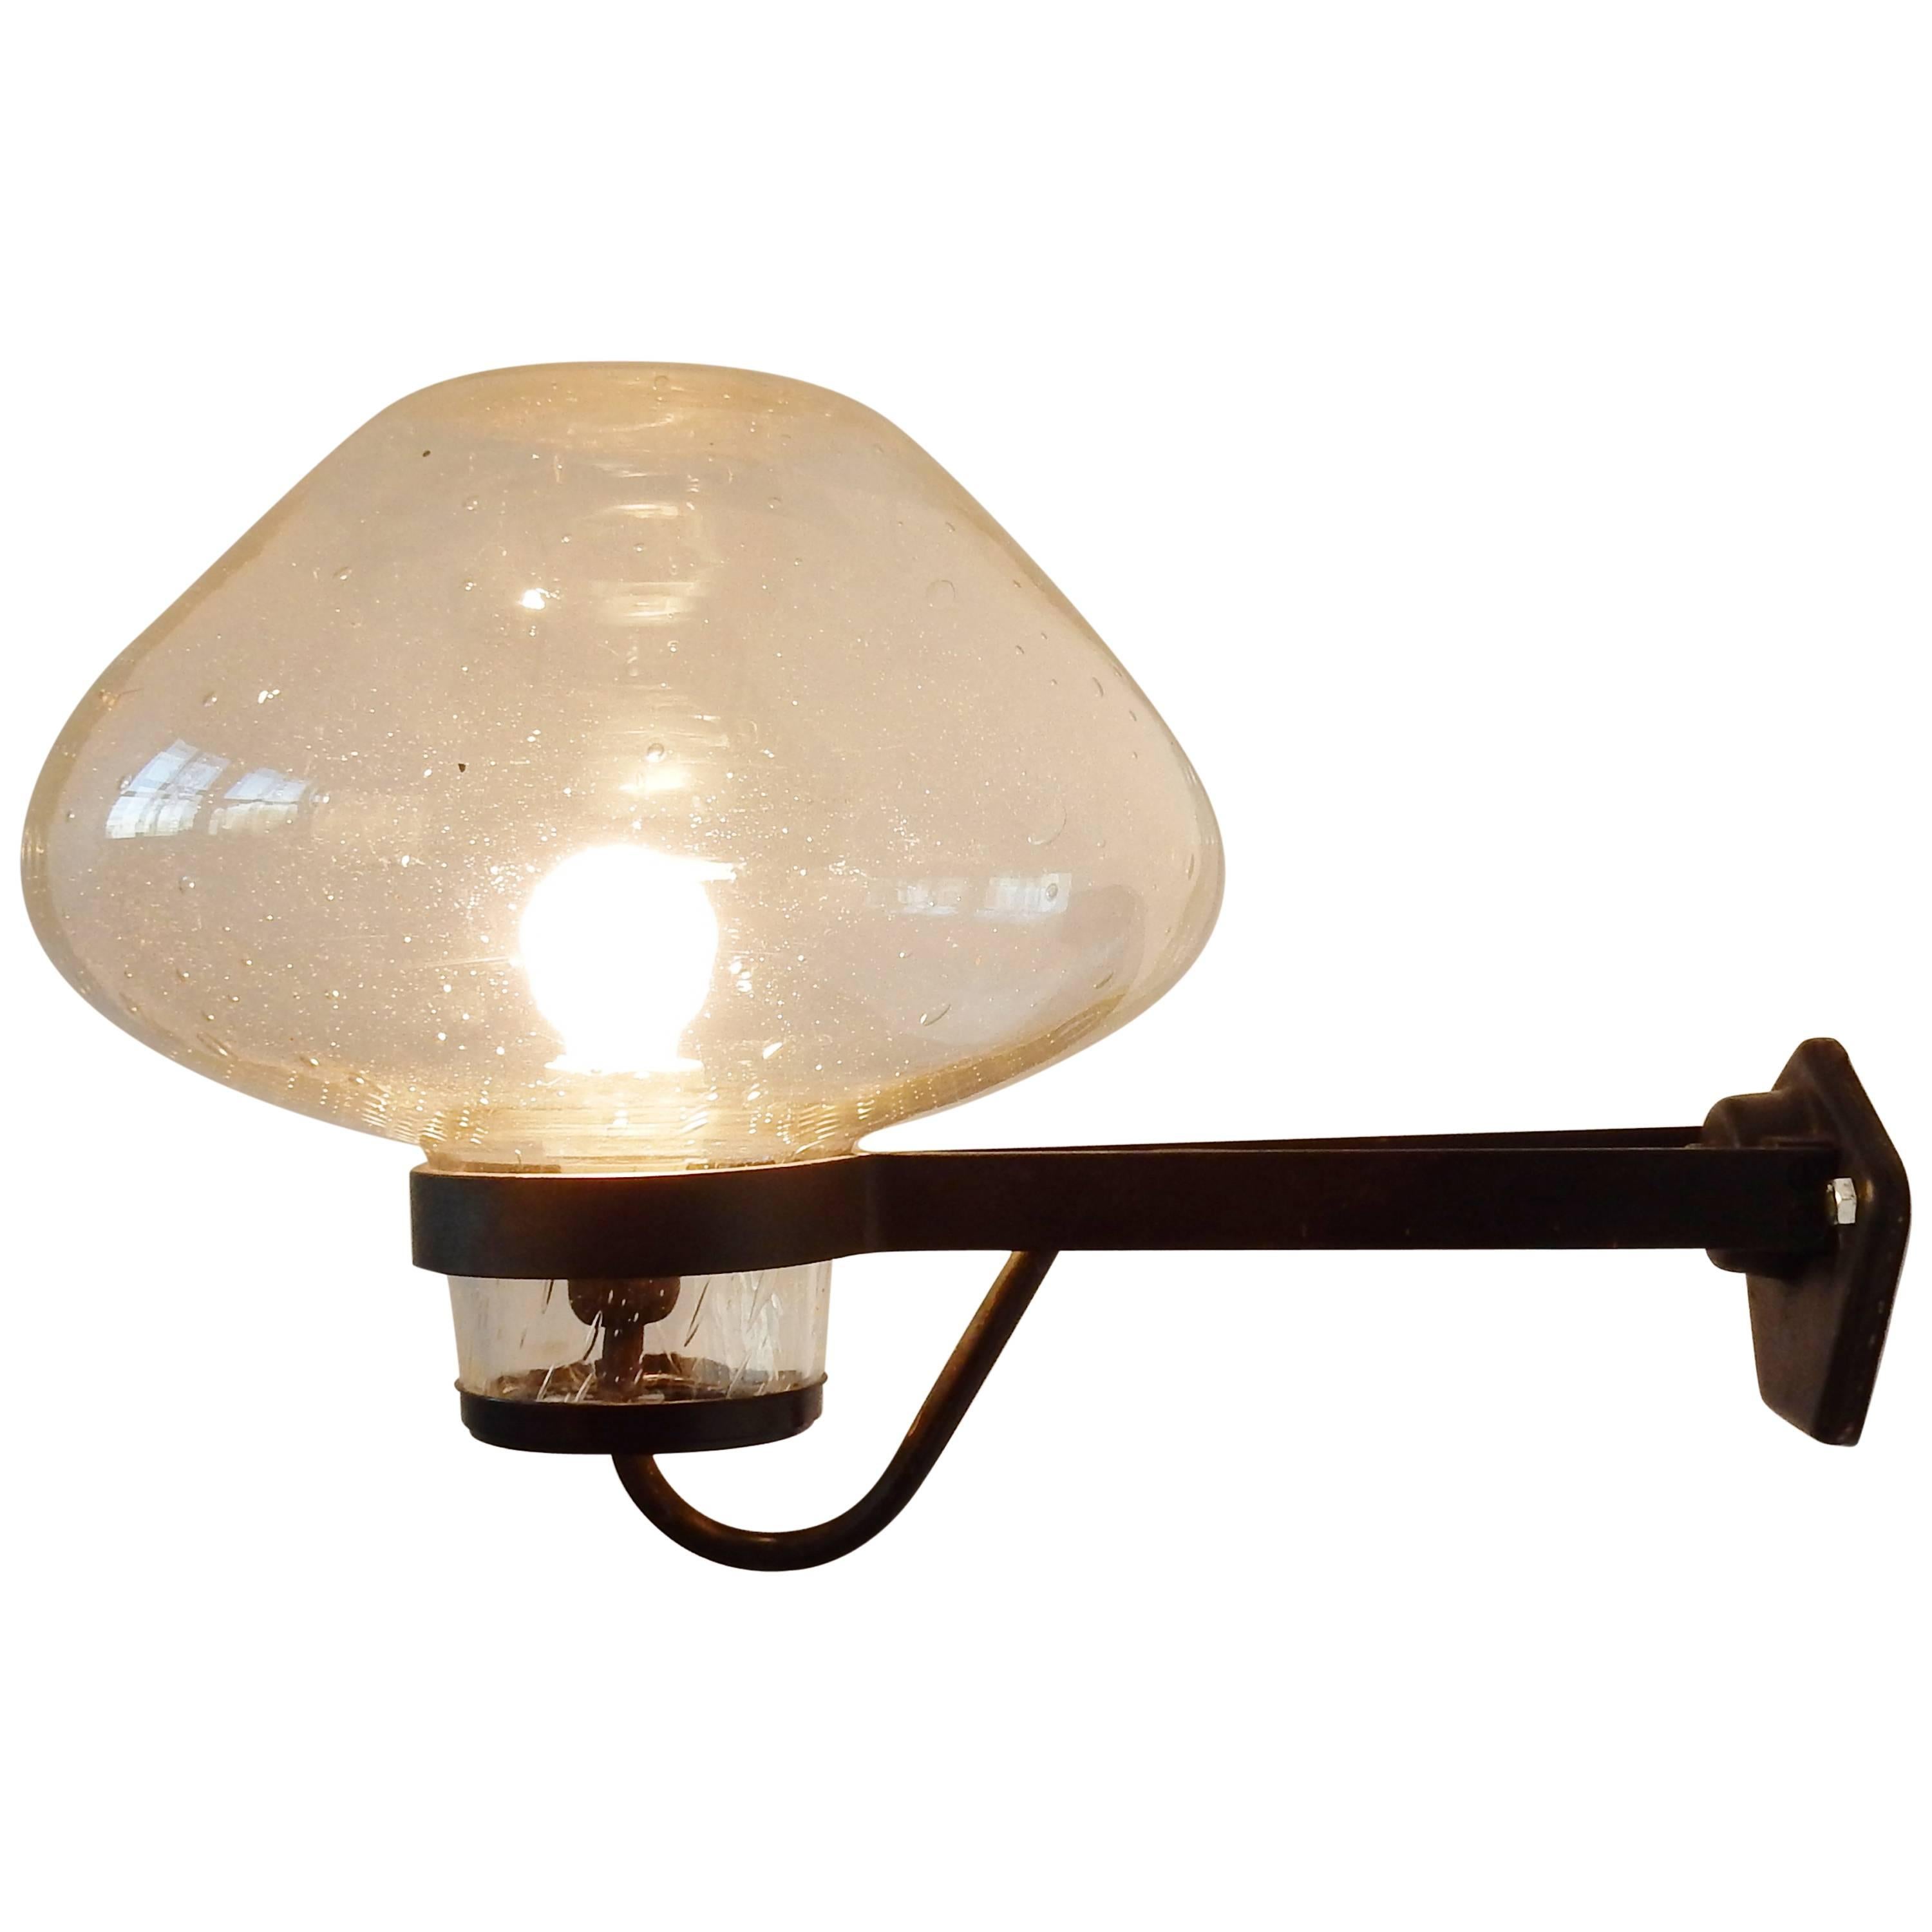 Rare Large Size Wall Lamp by Gunnar Asplund for ASEA, Sweden, 1950s